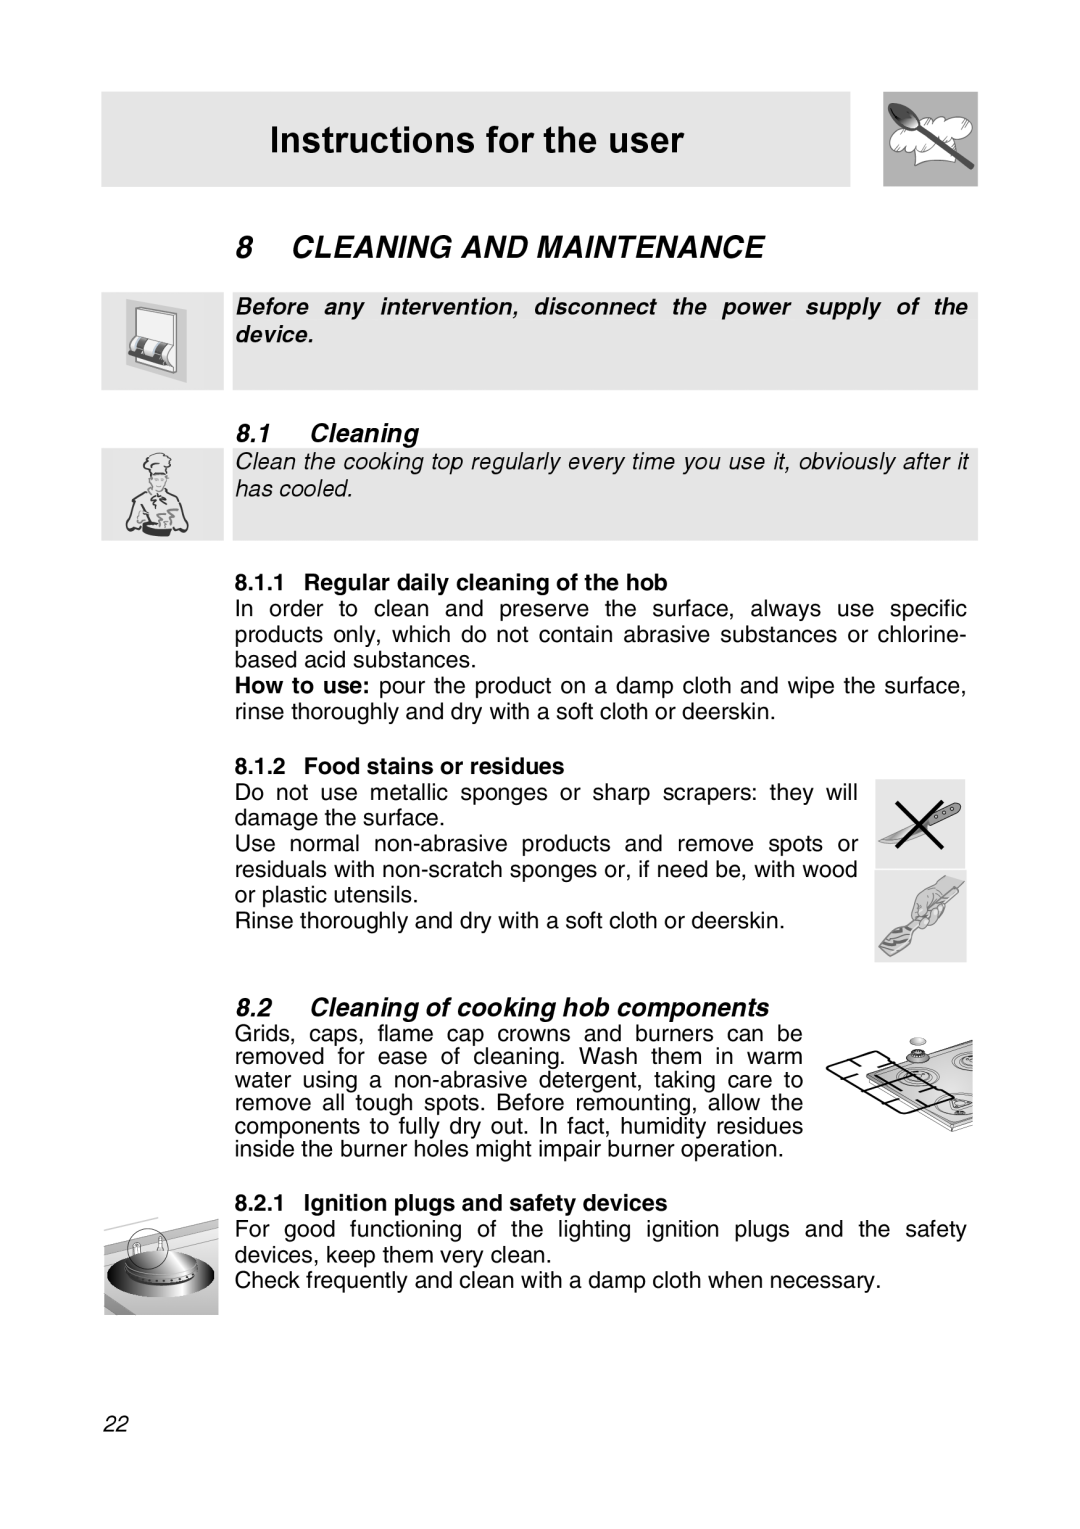 Smeg CIR34AX3 manual Cleaning And Maintenance, Cleaning of cooking hob components, Regular daily cleaning of the hob 